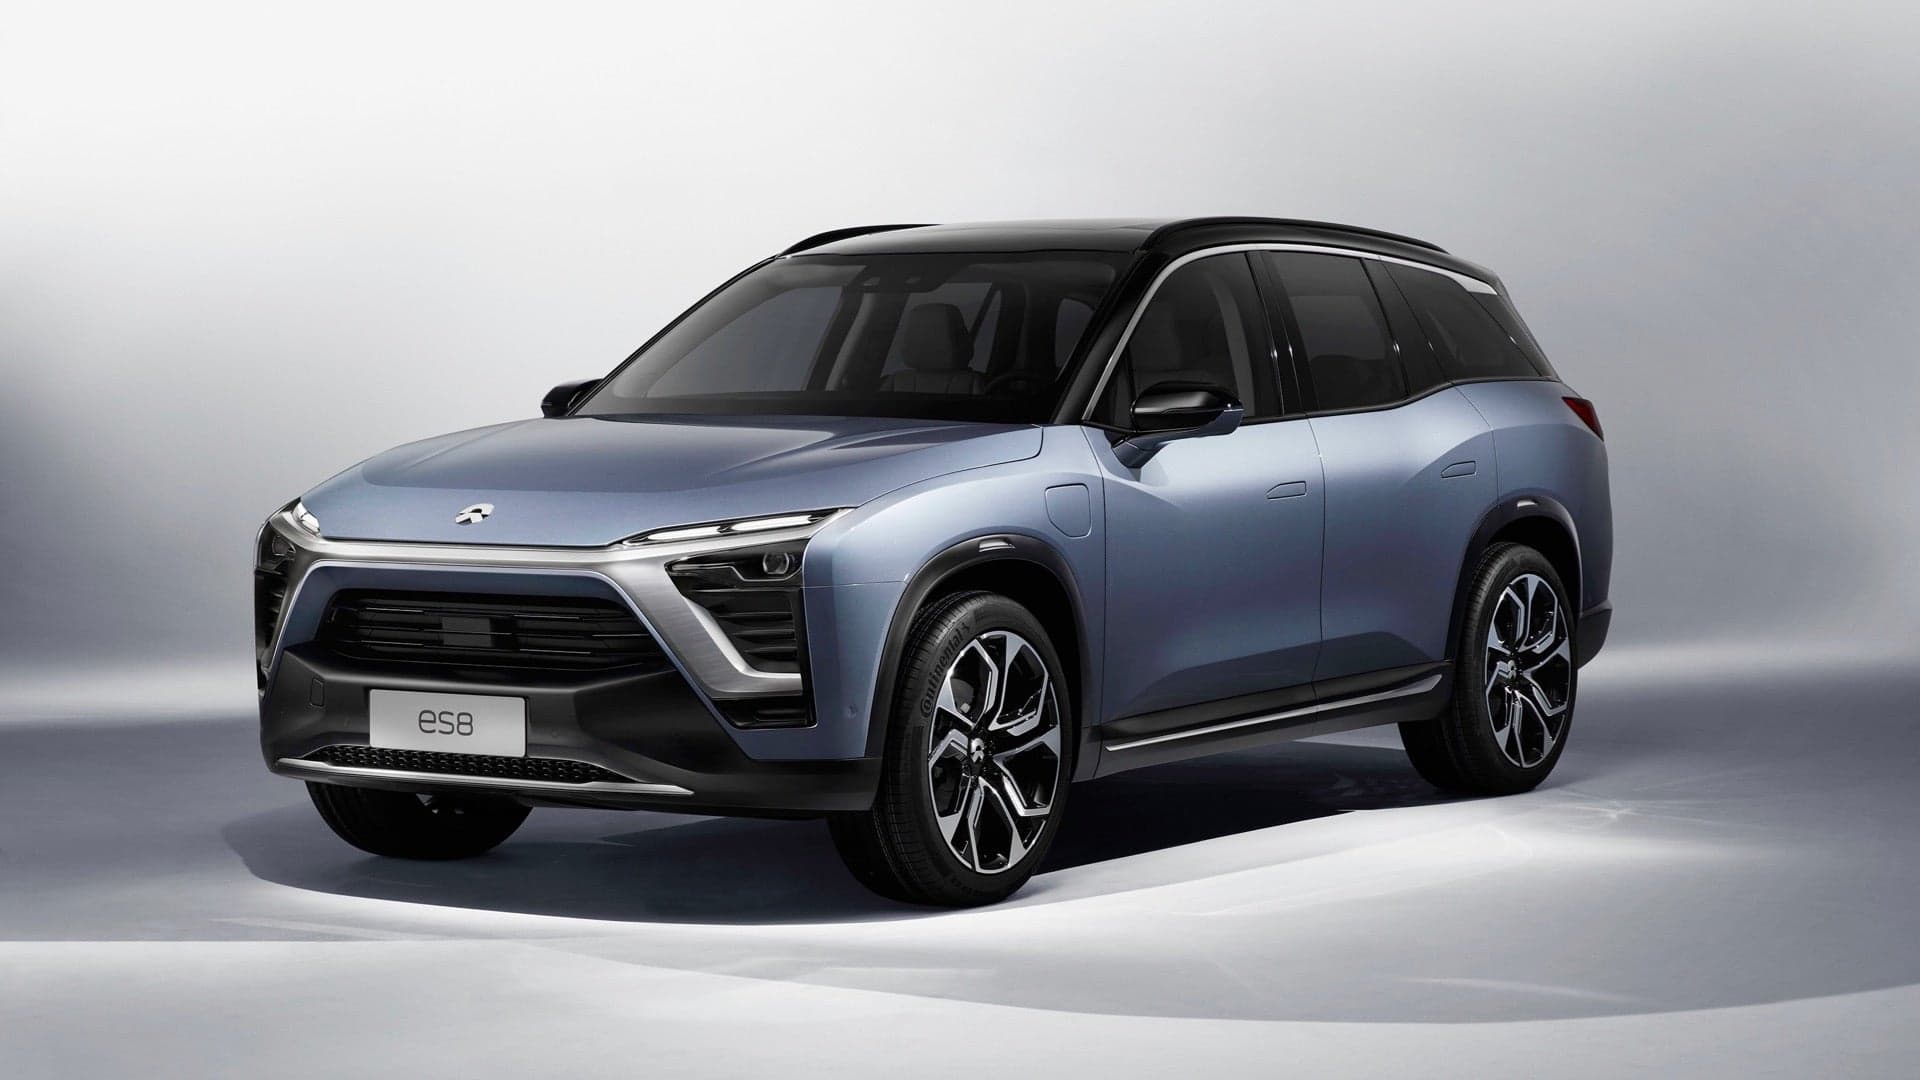 Chinese Electric-Car Startup Nio Raises $1B in IPO